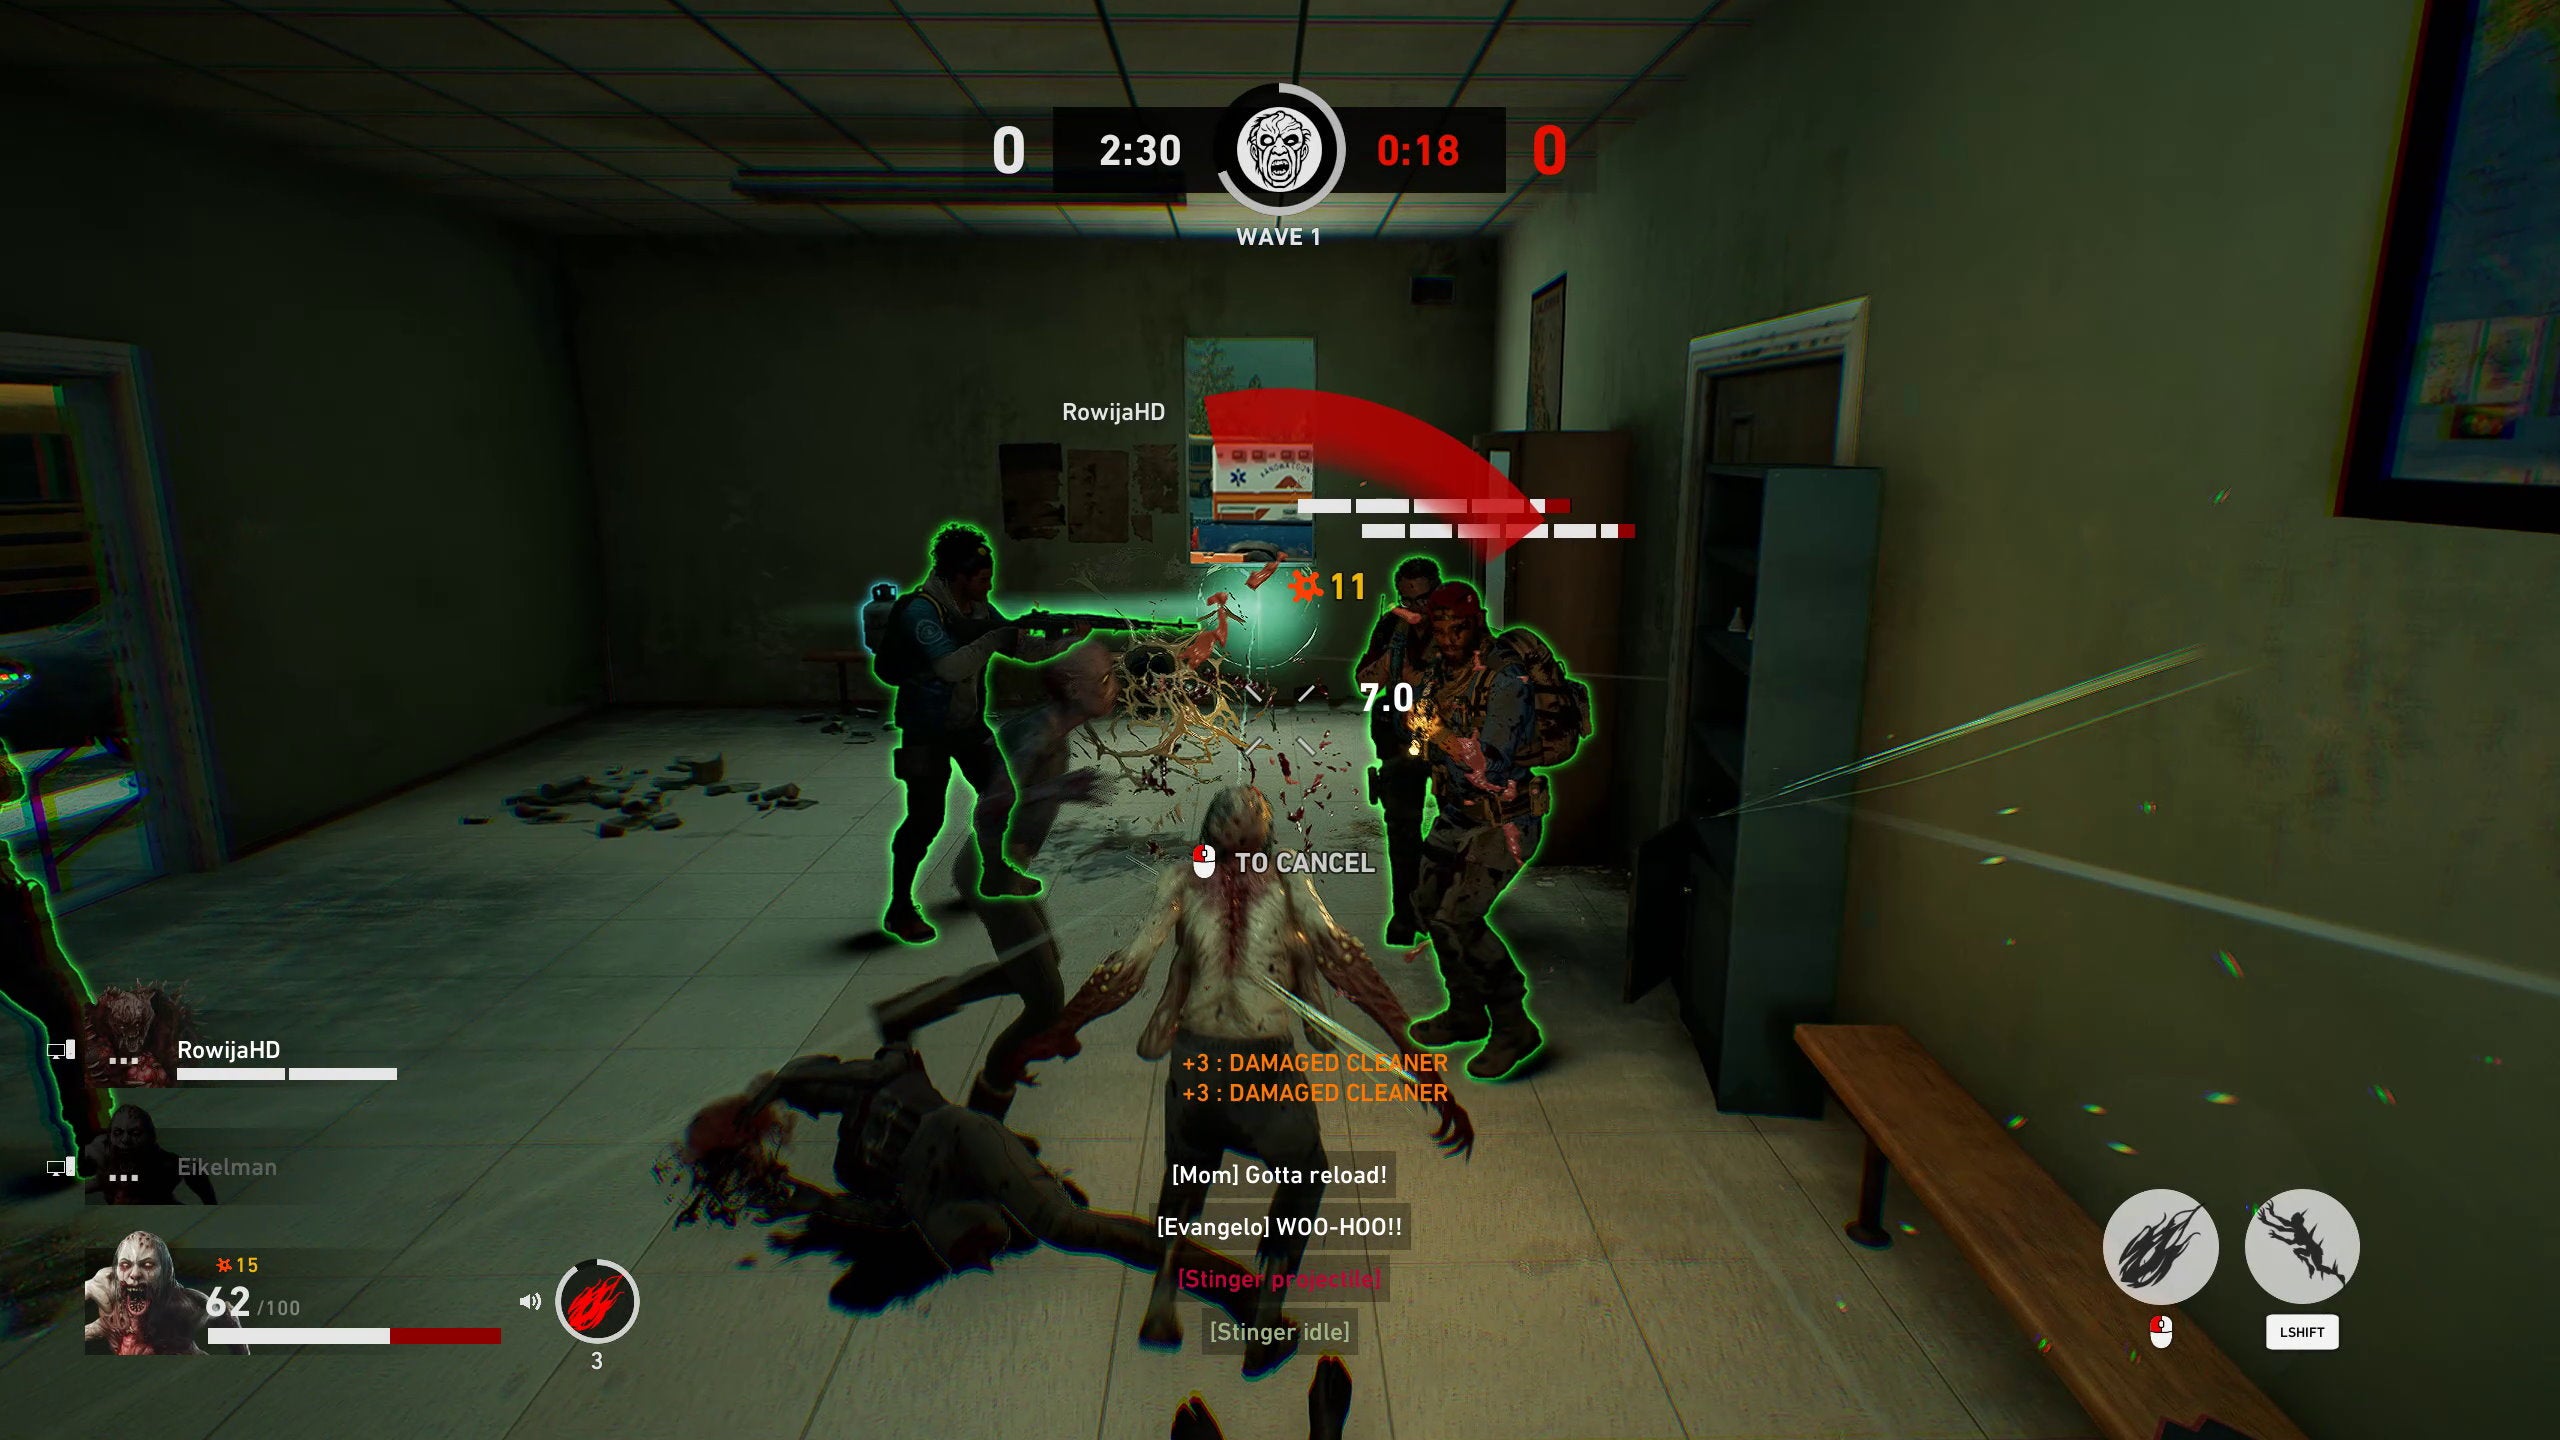 A zombie faces off against four human players in Back 4 Blood's PvP mode